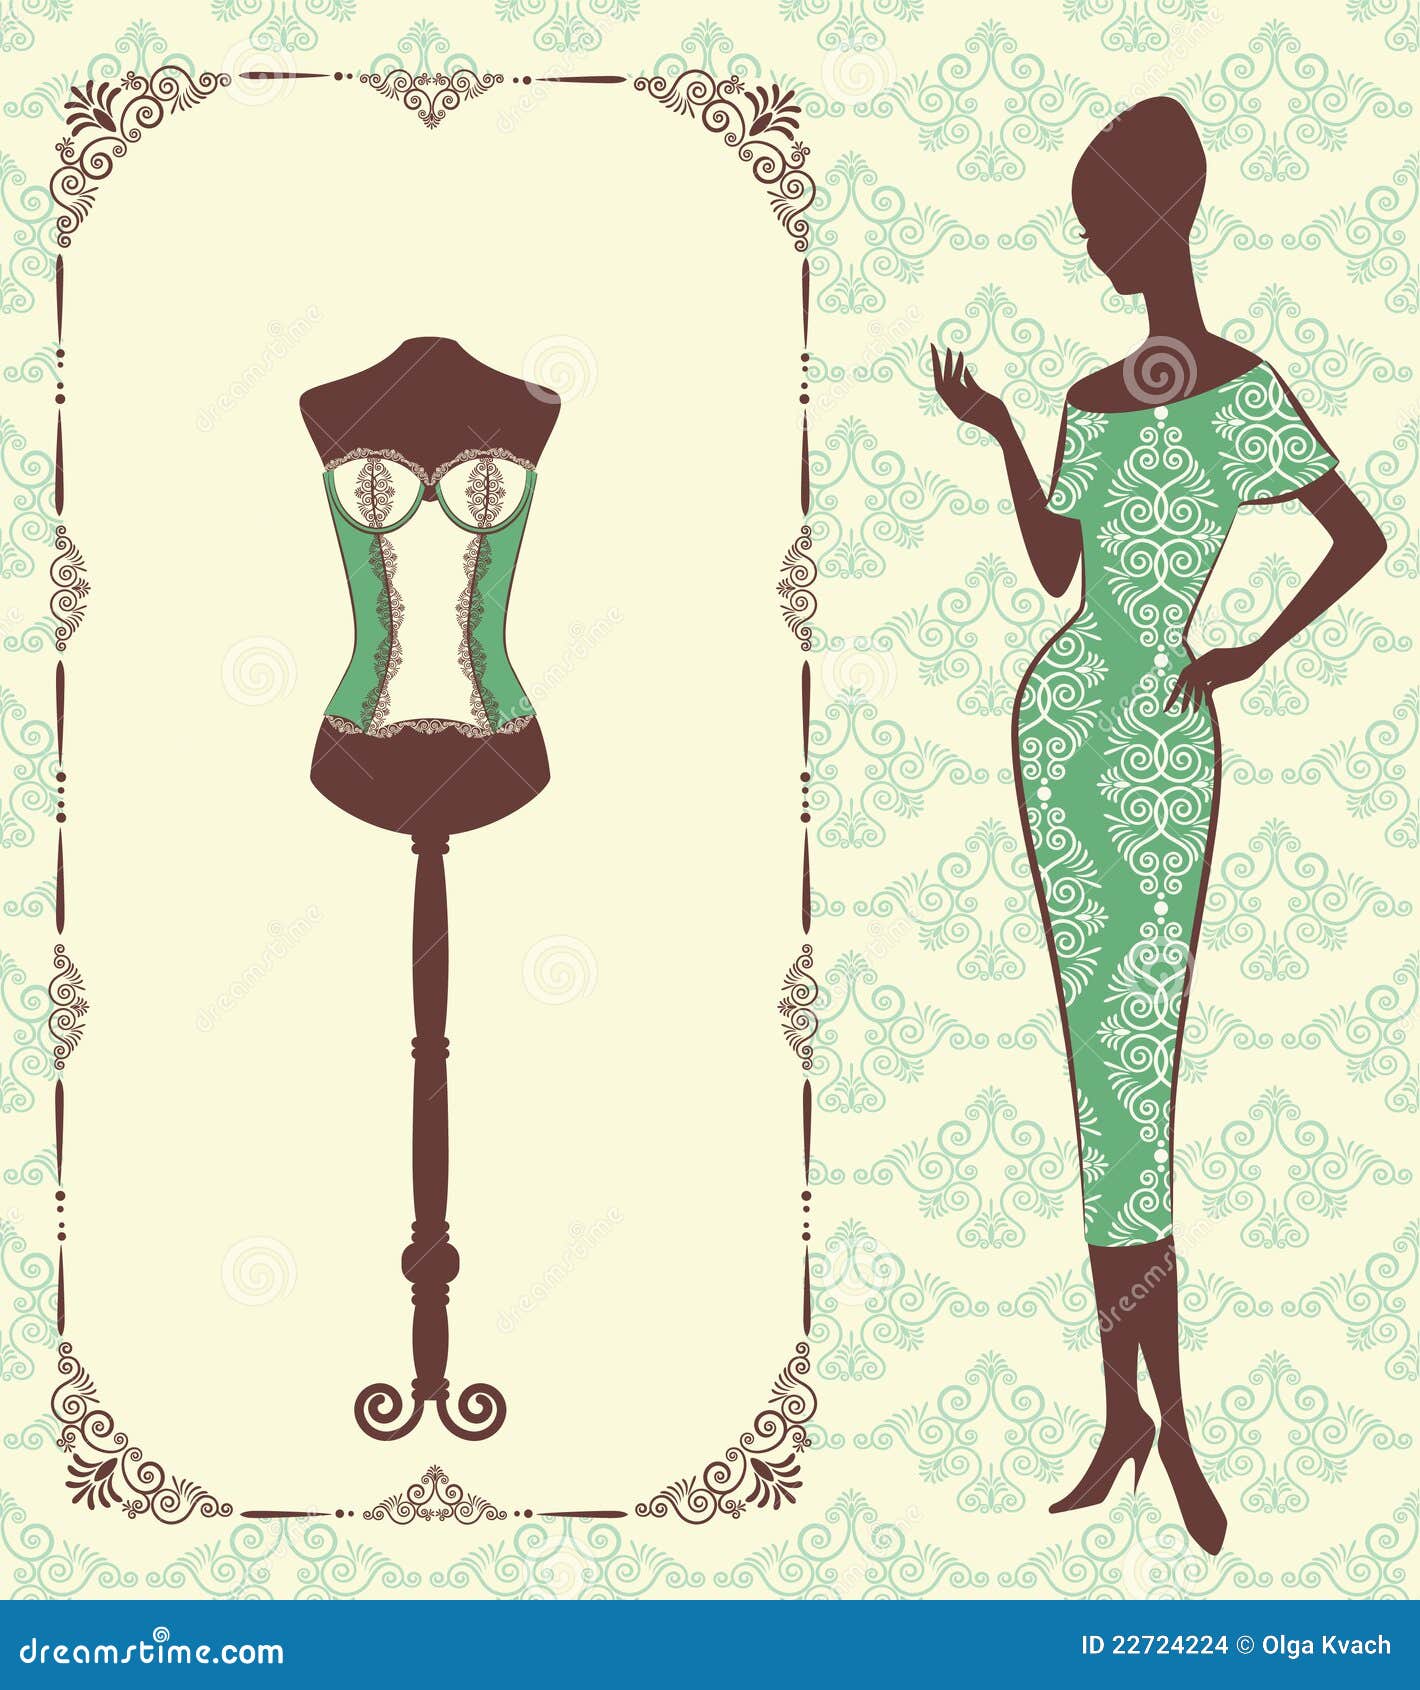 Vintage corset stock vector. Illustration of lace, draw - 22724224